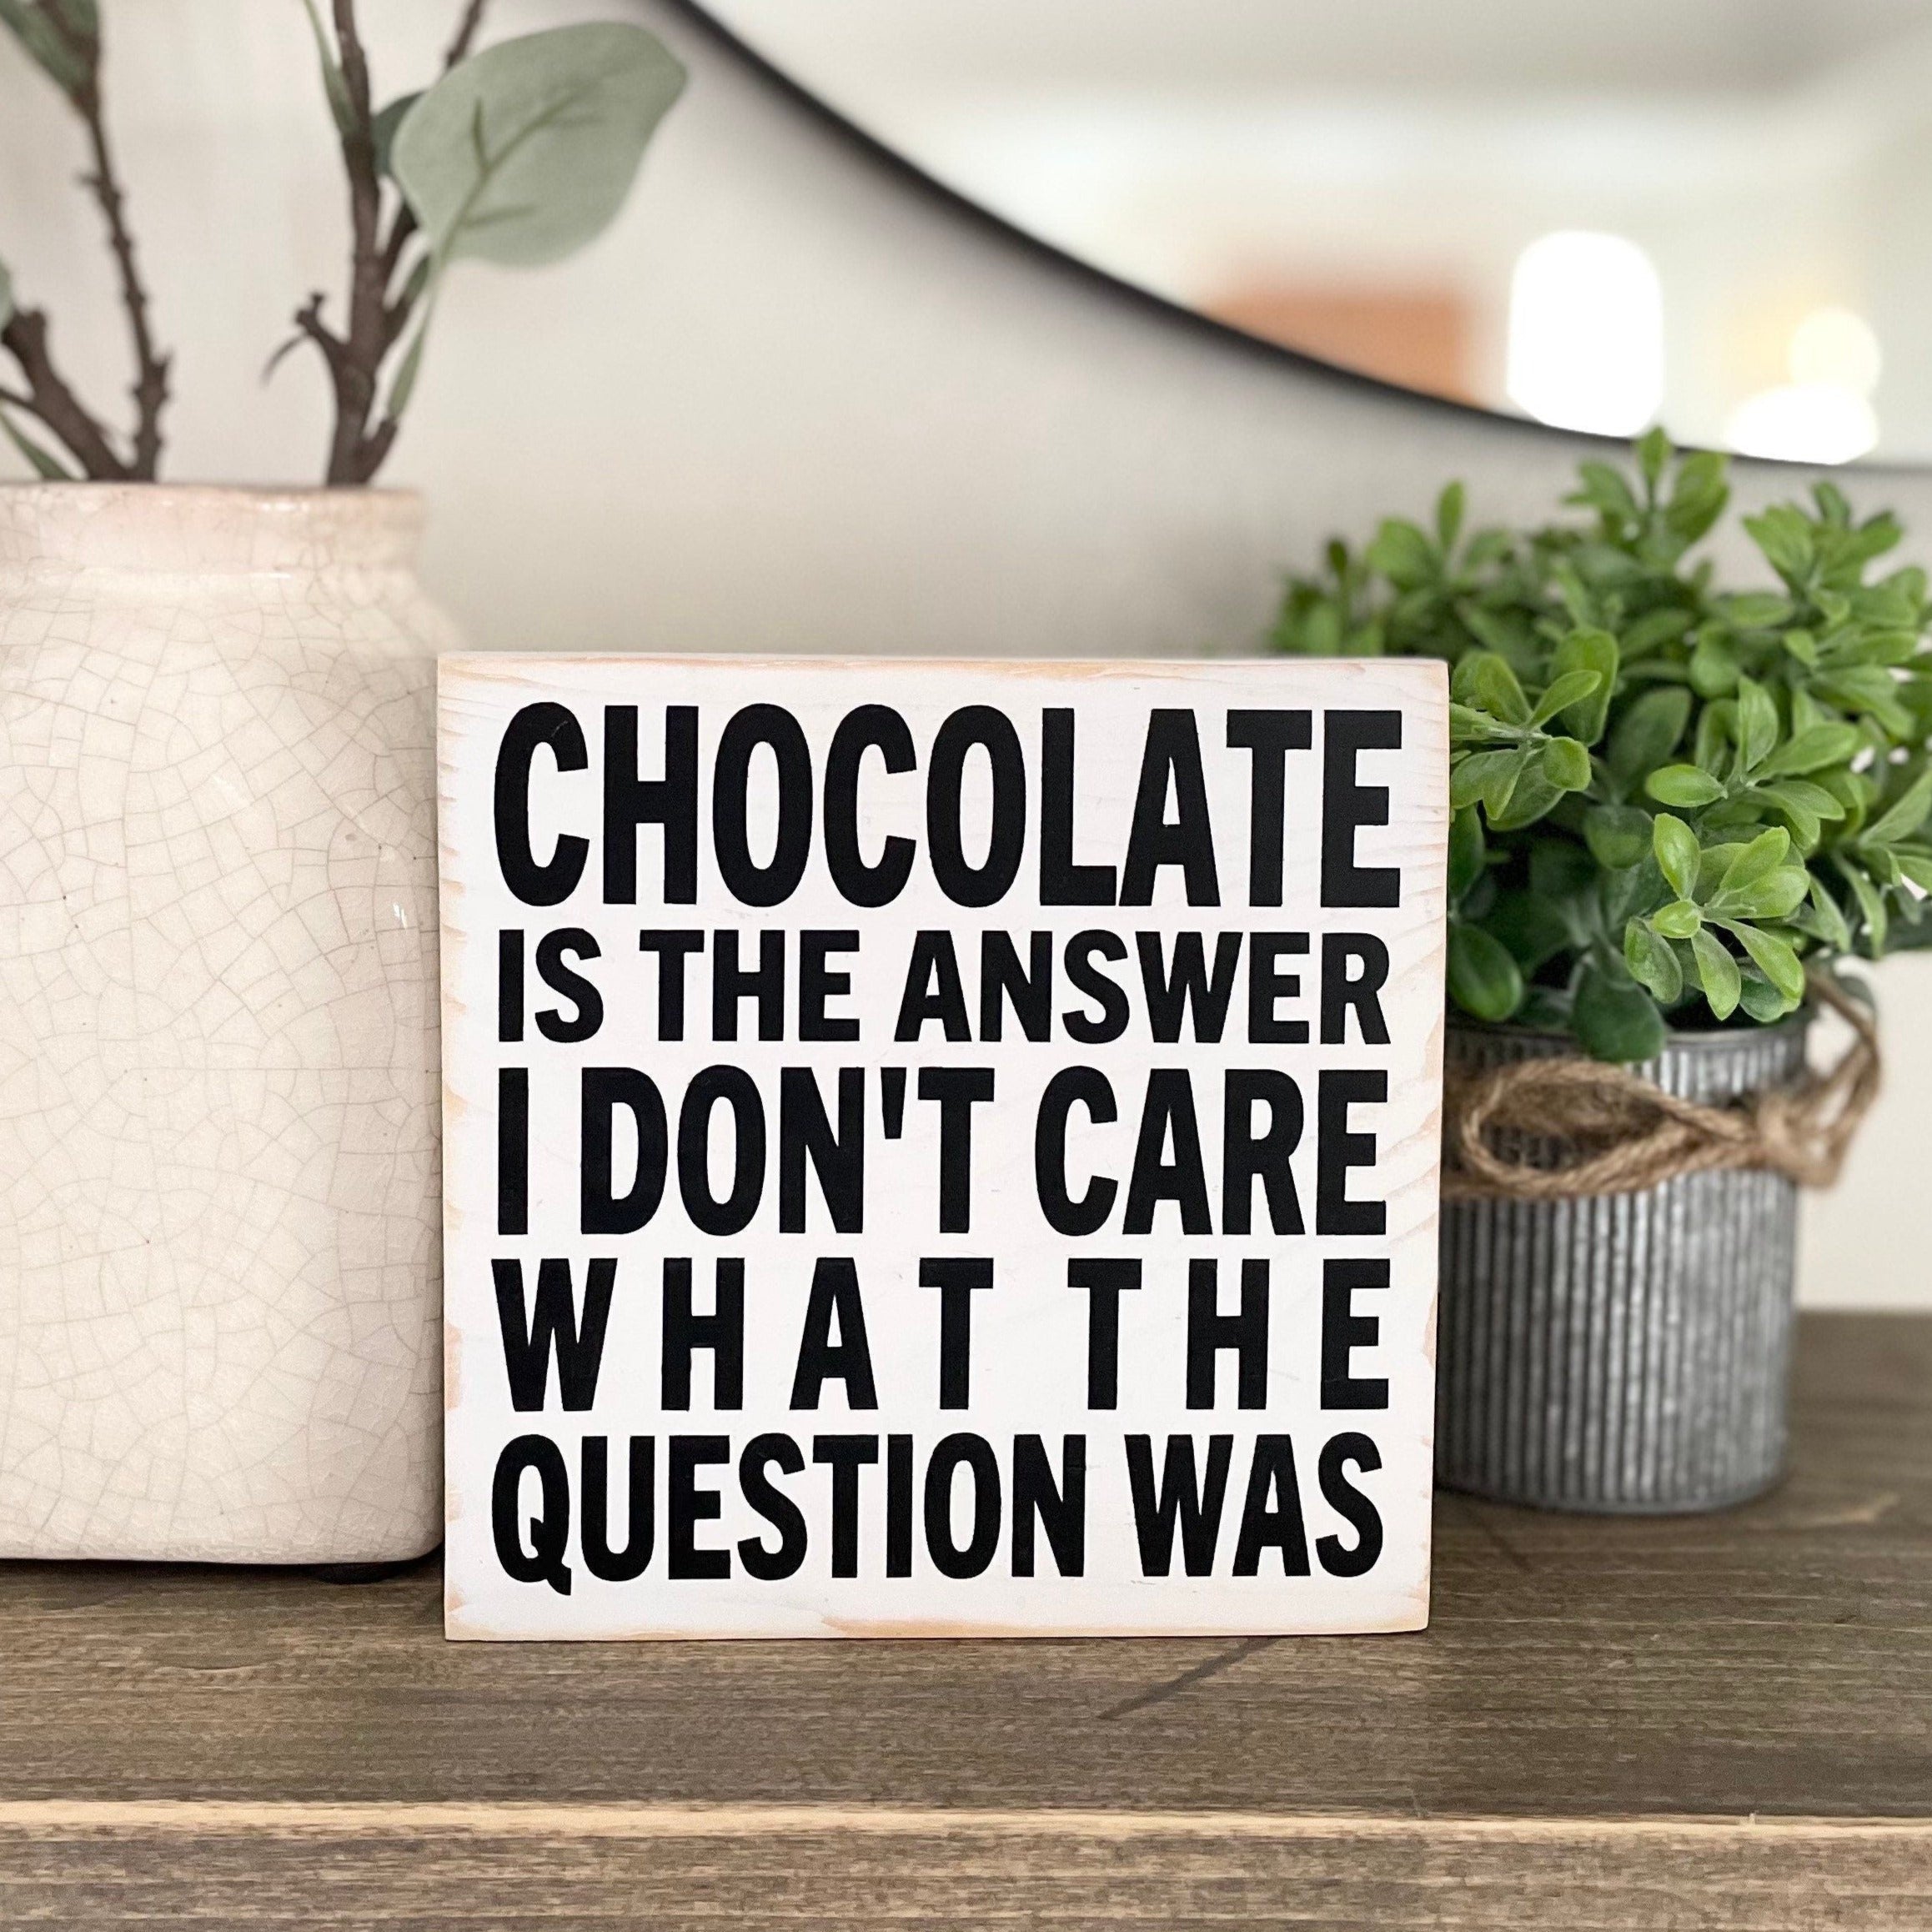 square, white wood sign with black lettering in all caps that says "Chocolate is the answer I don't care what the question was"